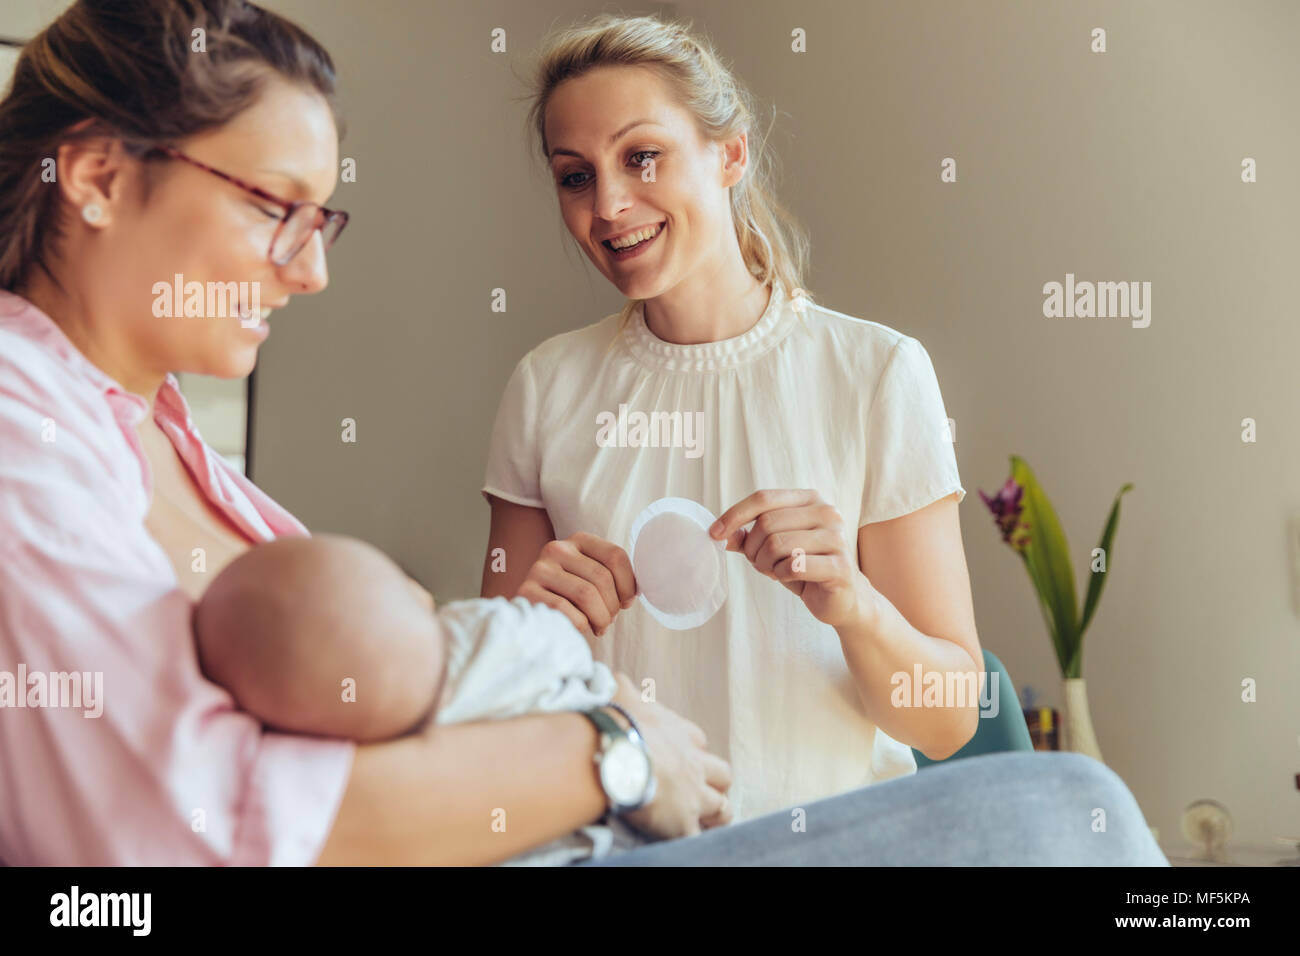 Midwife holding a disposable nursing pad for breastfeeding mother Stock Photo